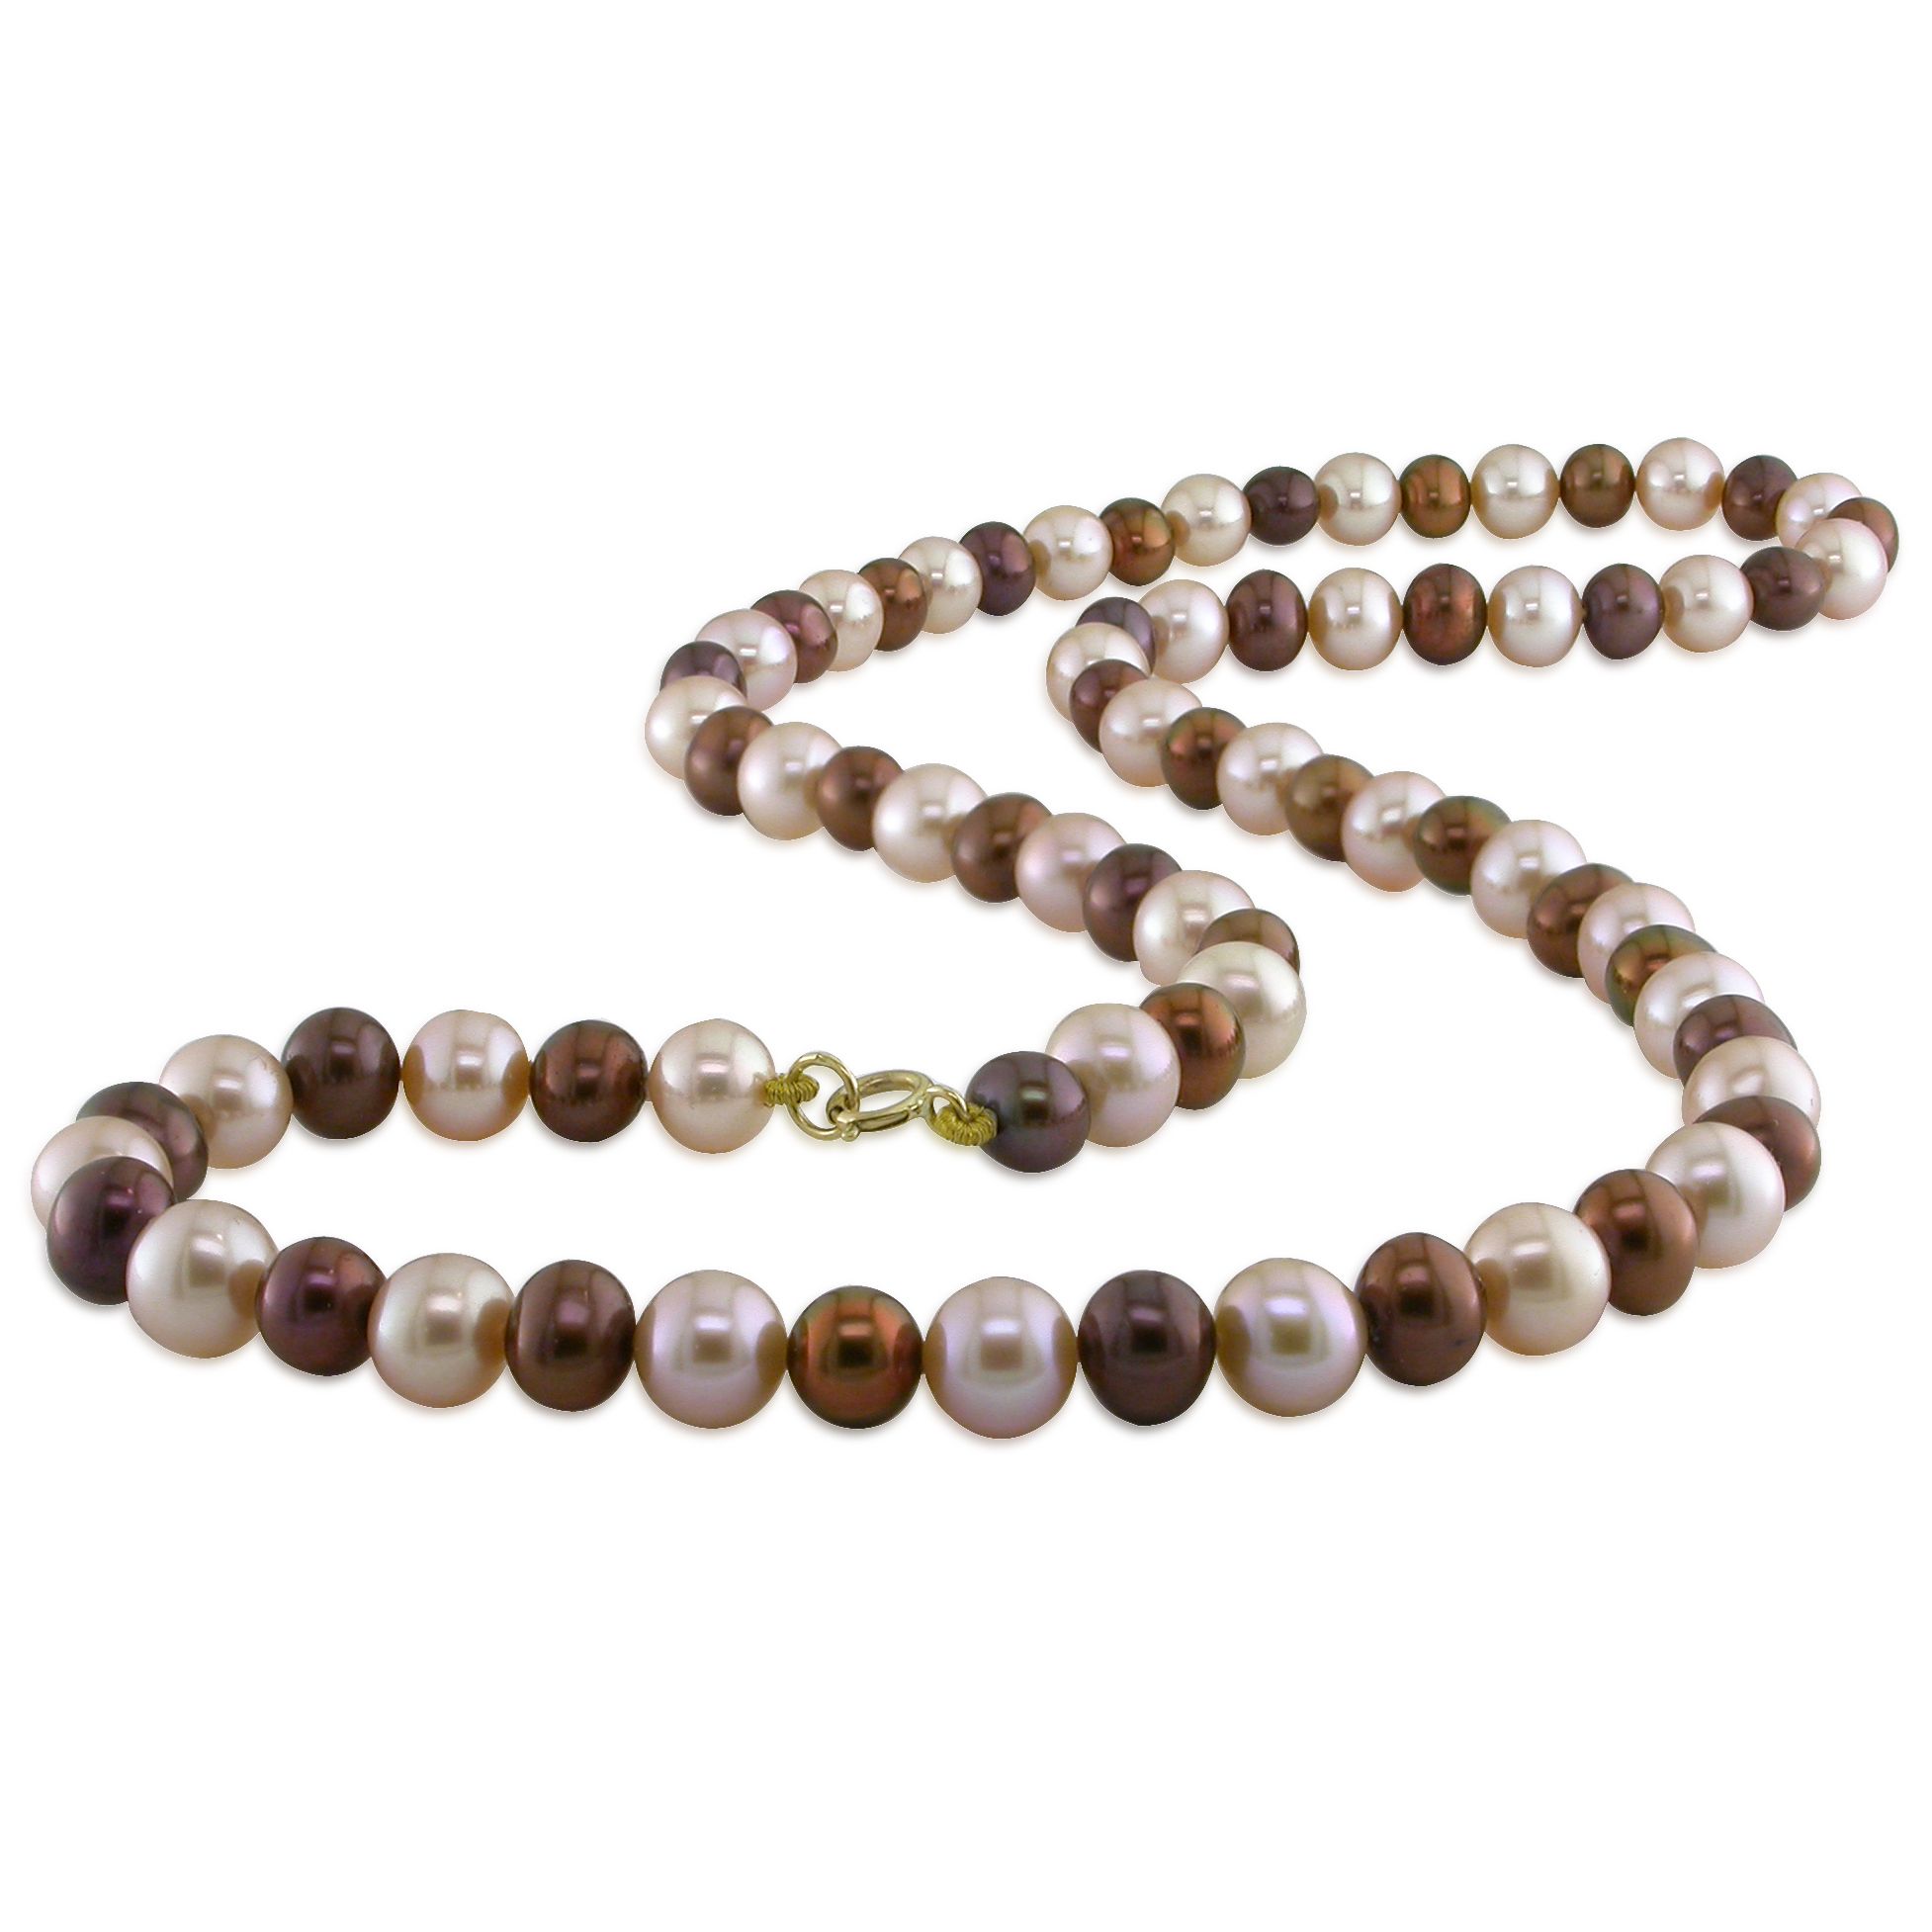 4-5mm Pink and Brown Cultured Freshwater Pearl Necklace